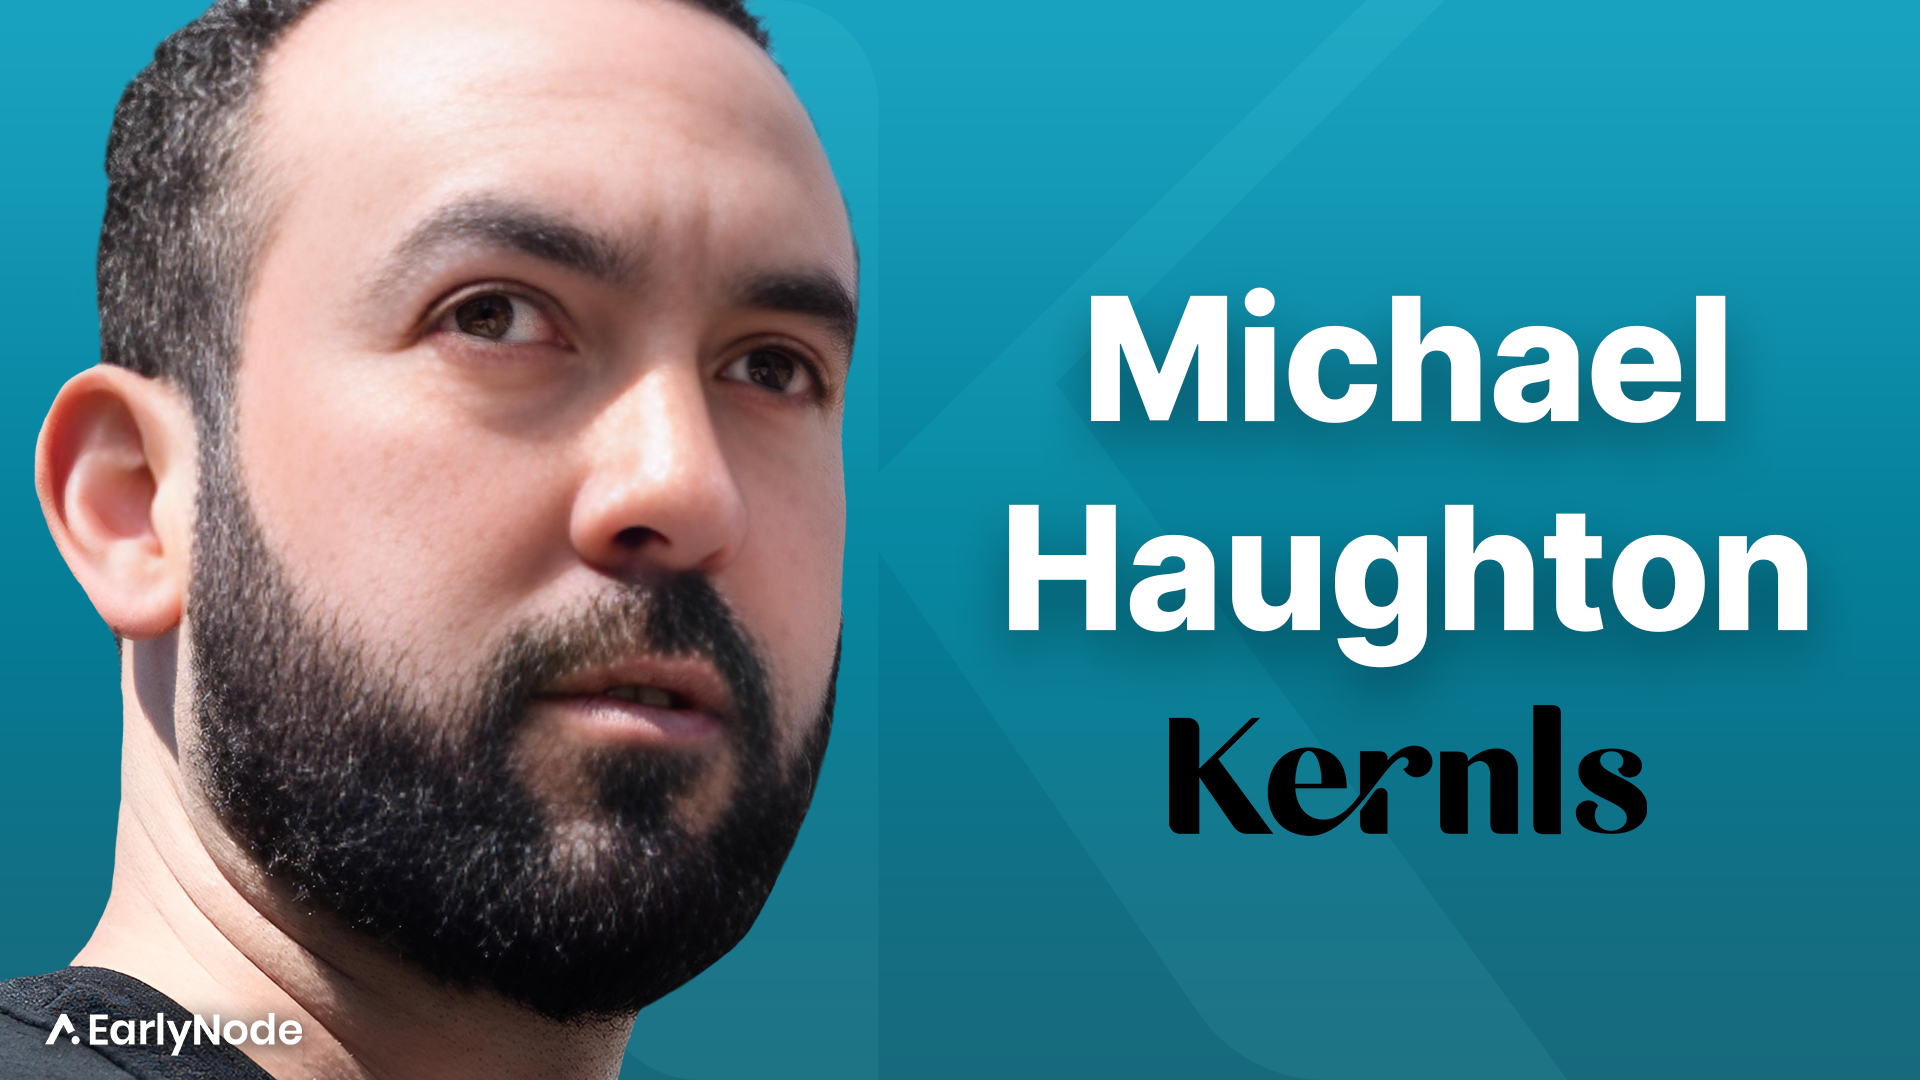 How Michael Haughton Helps Research Foundations Attract, Grow, and Retain Large Donors with Kernls